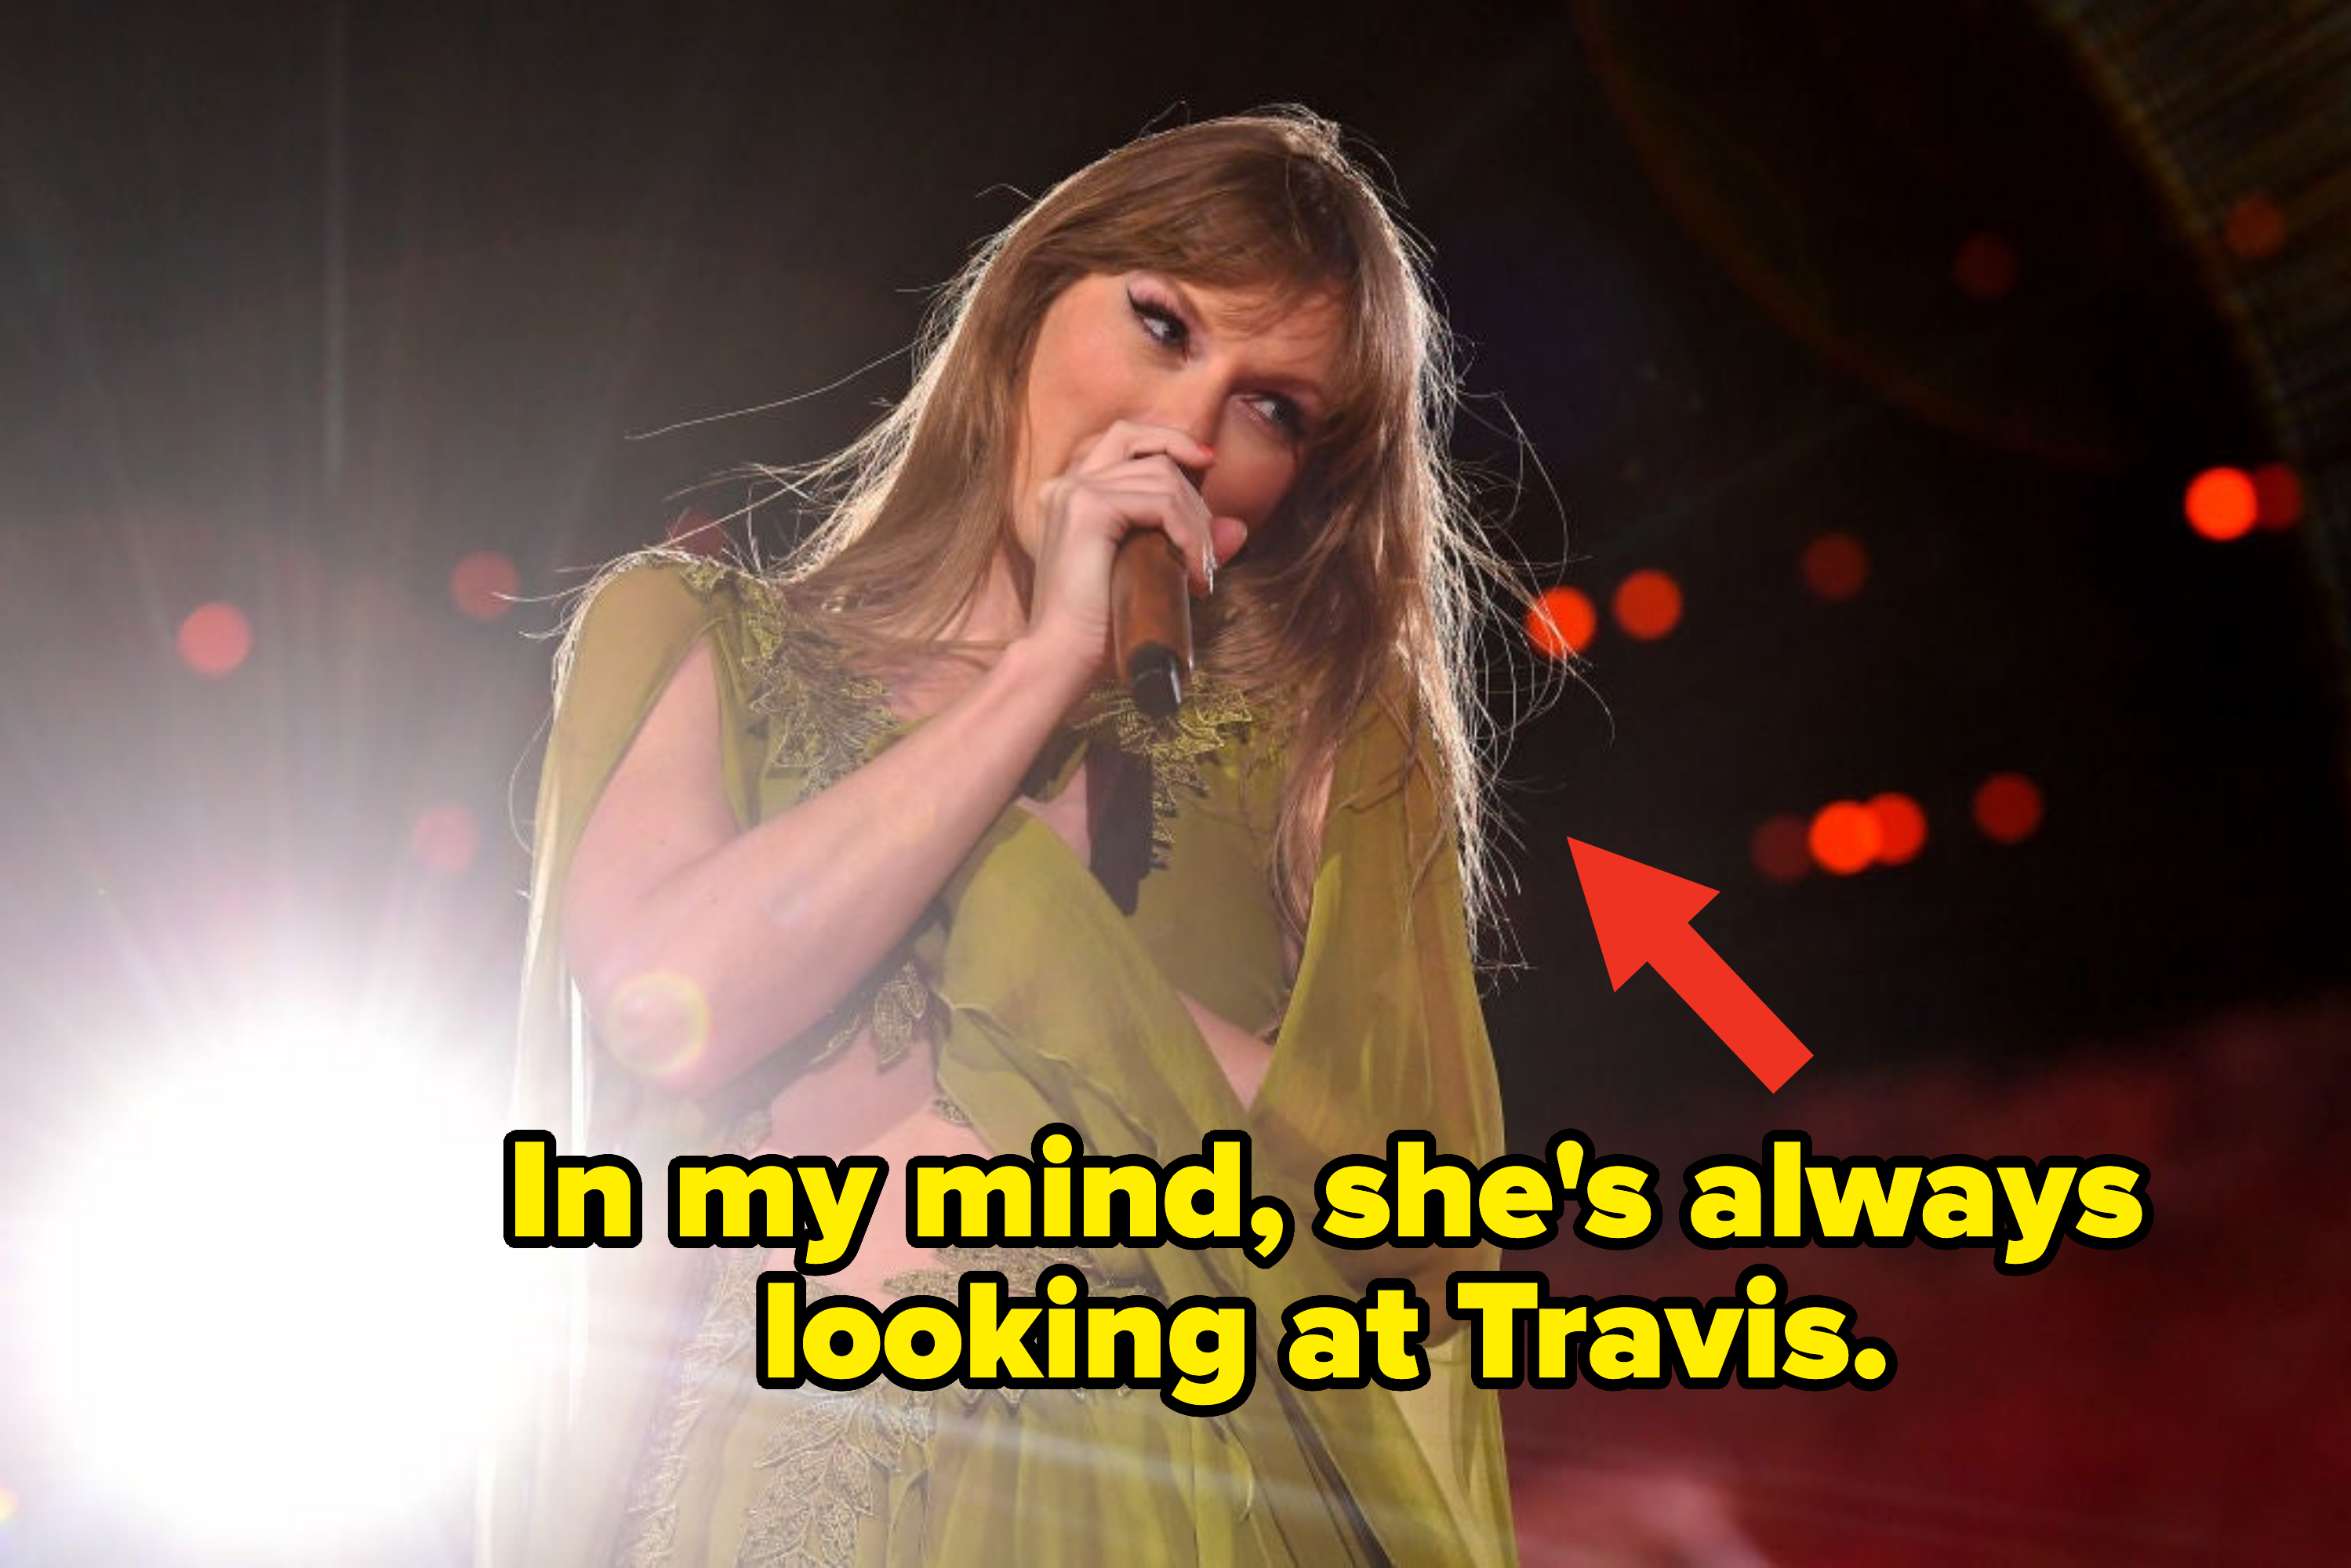 &quot;In my mind, she&#x27;s always looking at Travis.&quot;